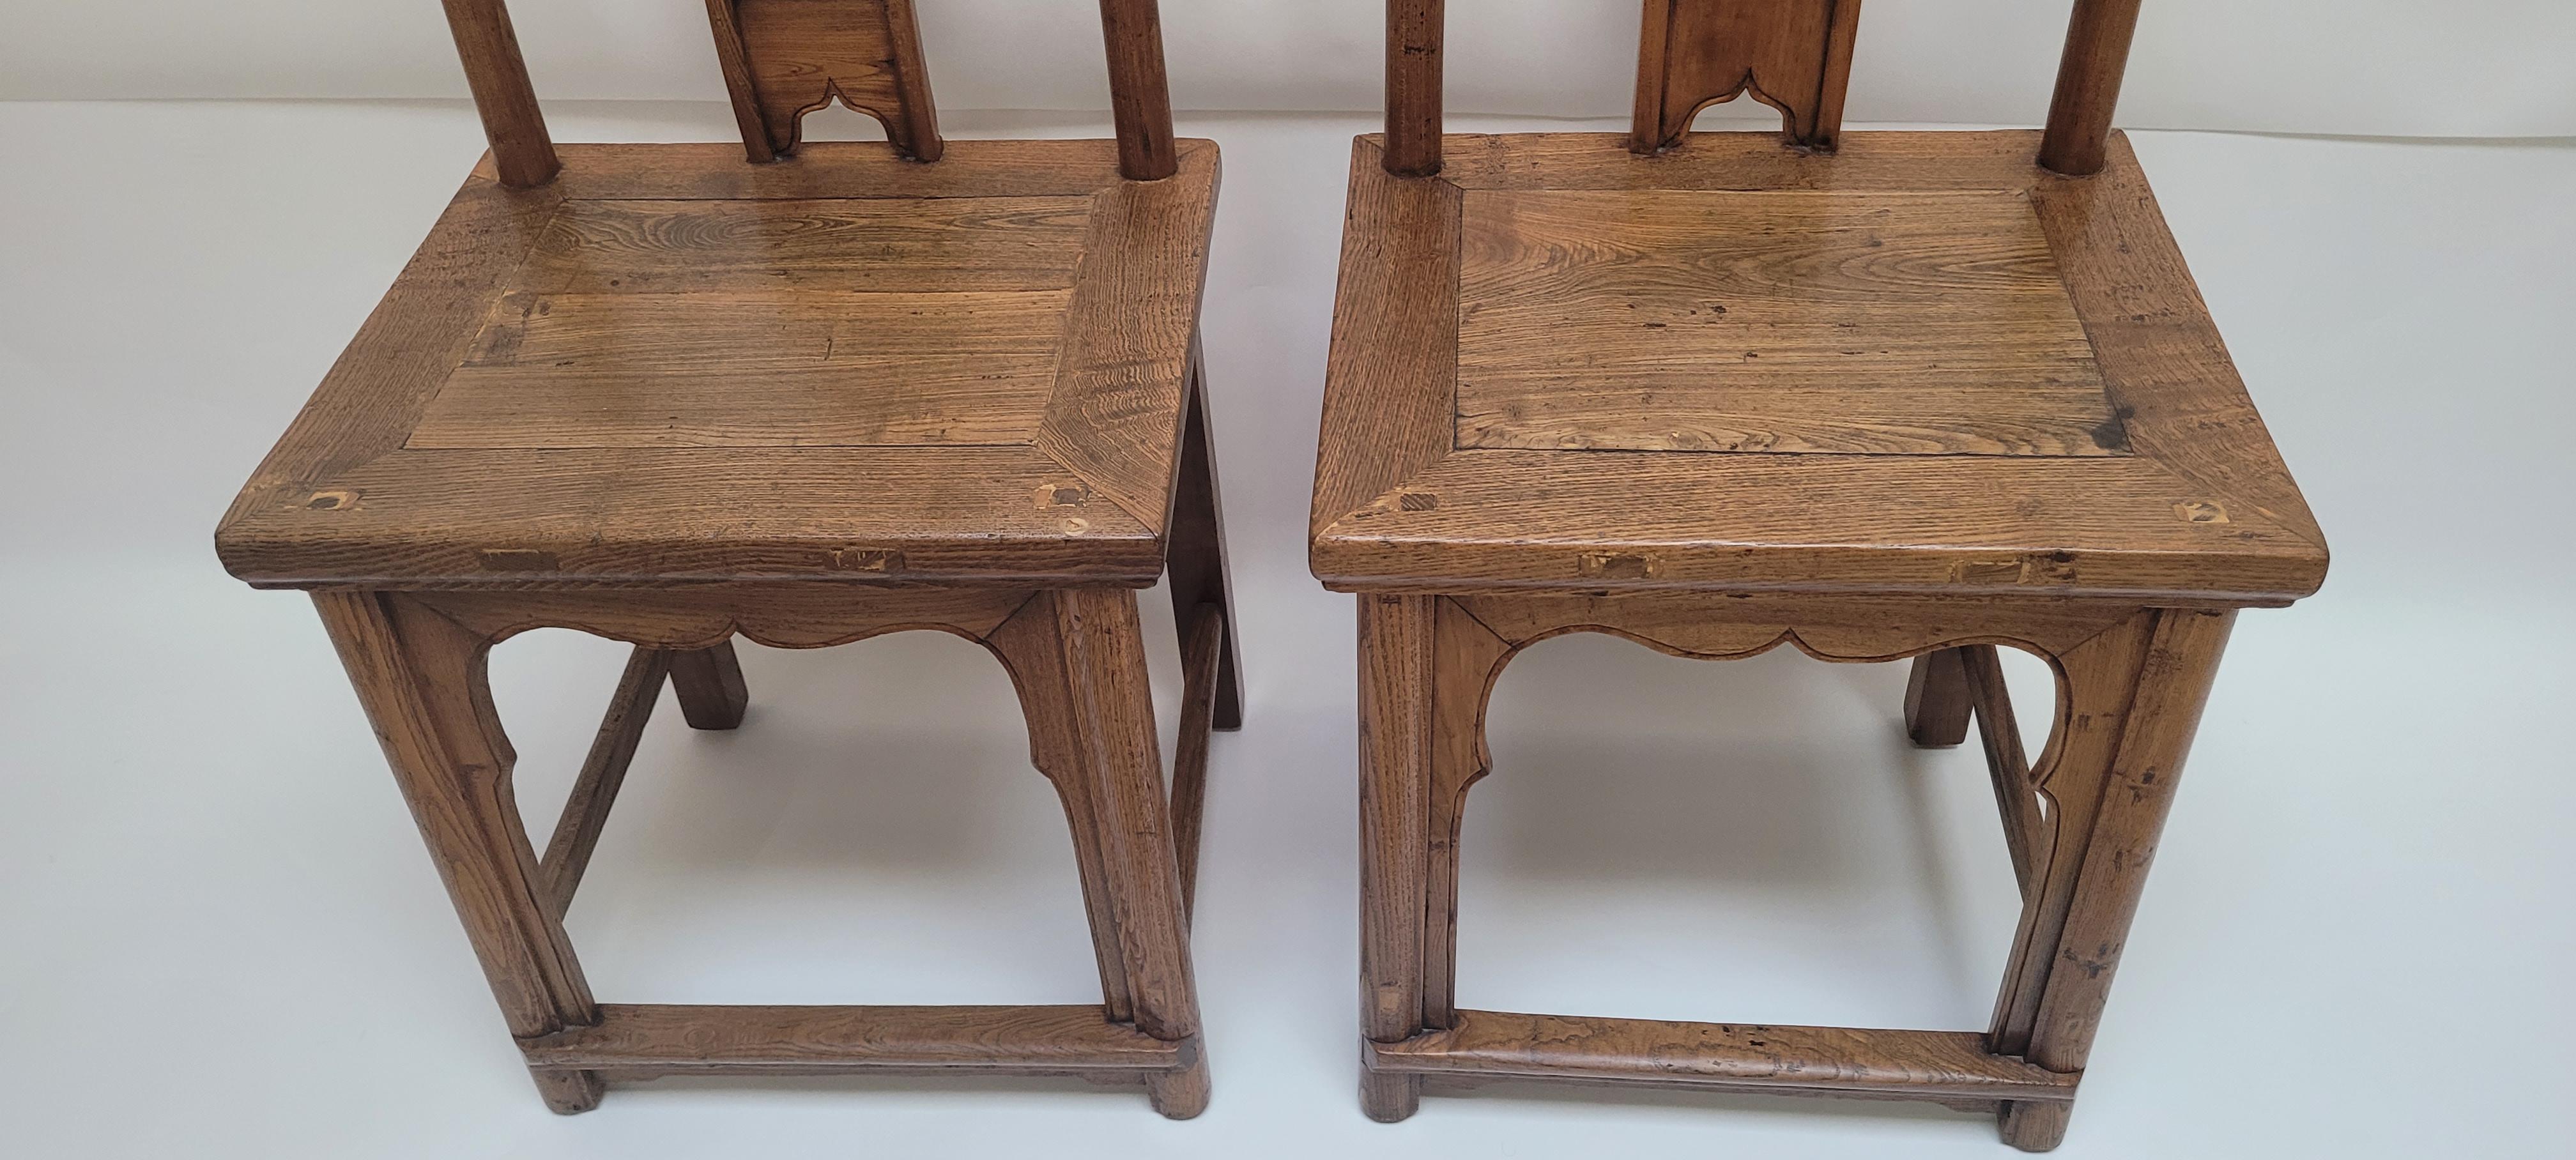 Pair of Lamphangar Chairs, 19th Century In Good Condition For Sale In Santa Monica, CA